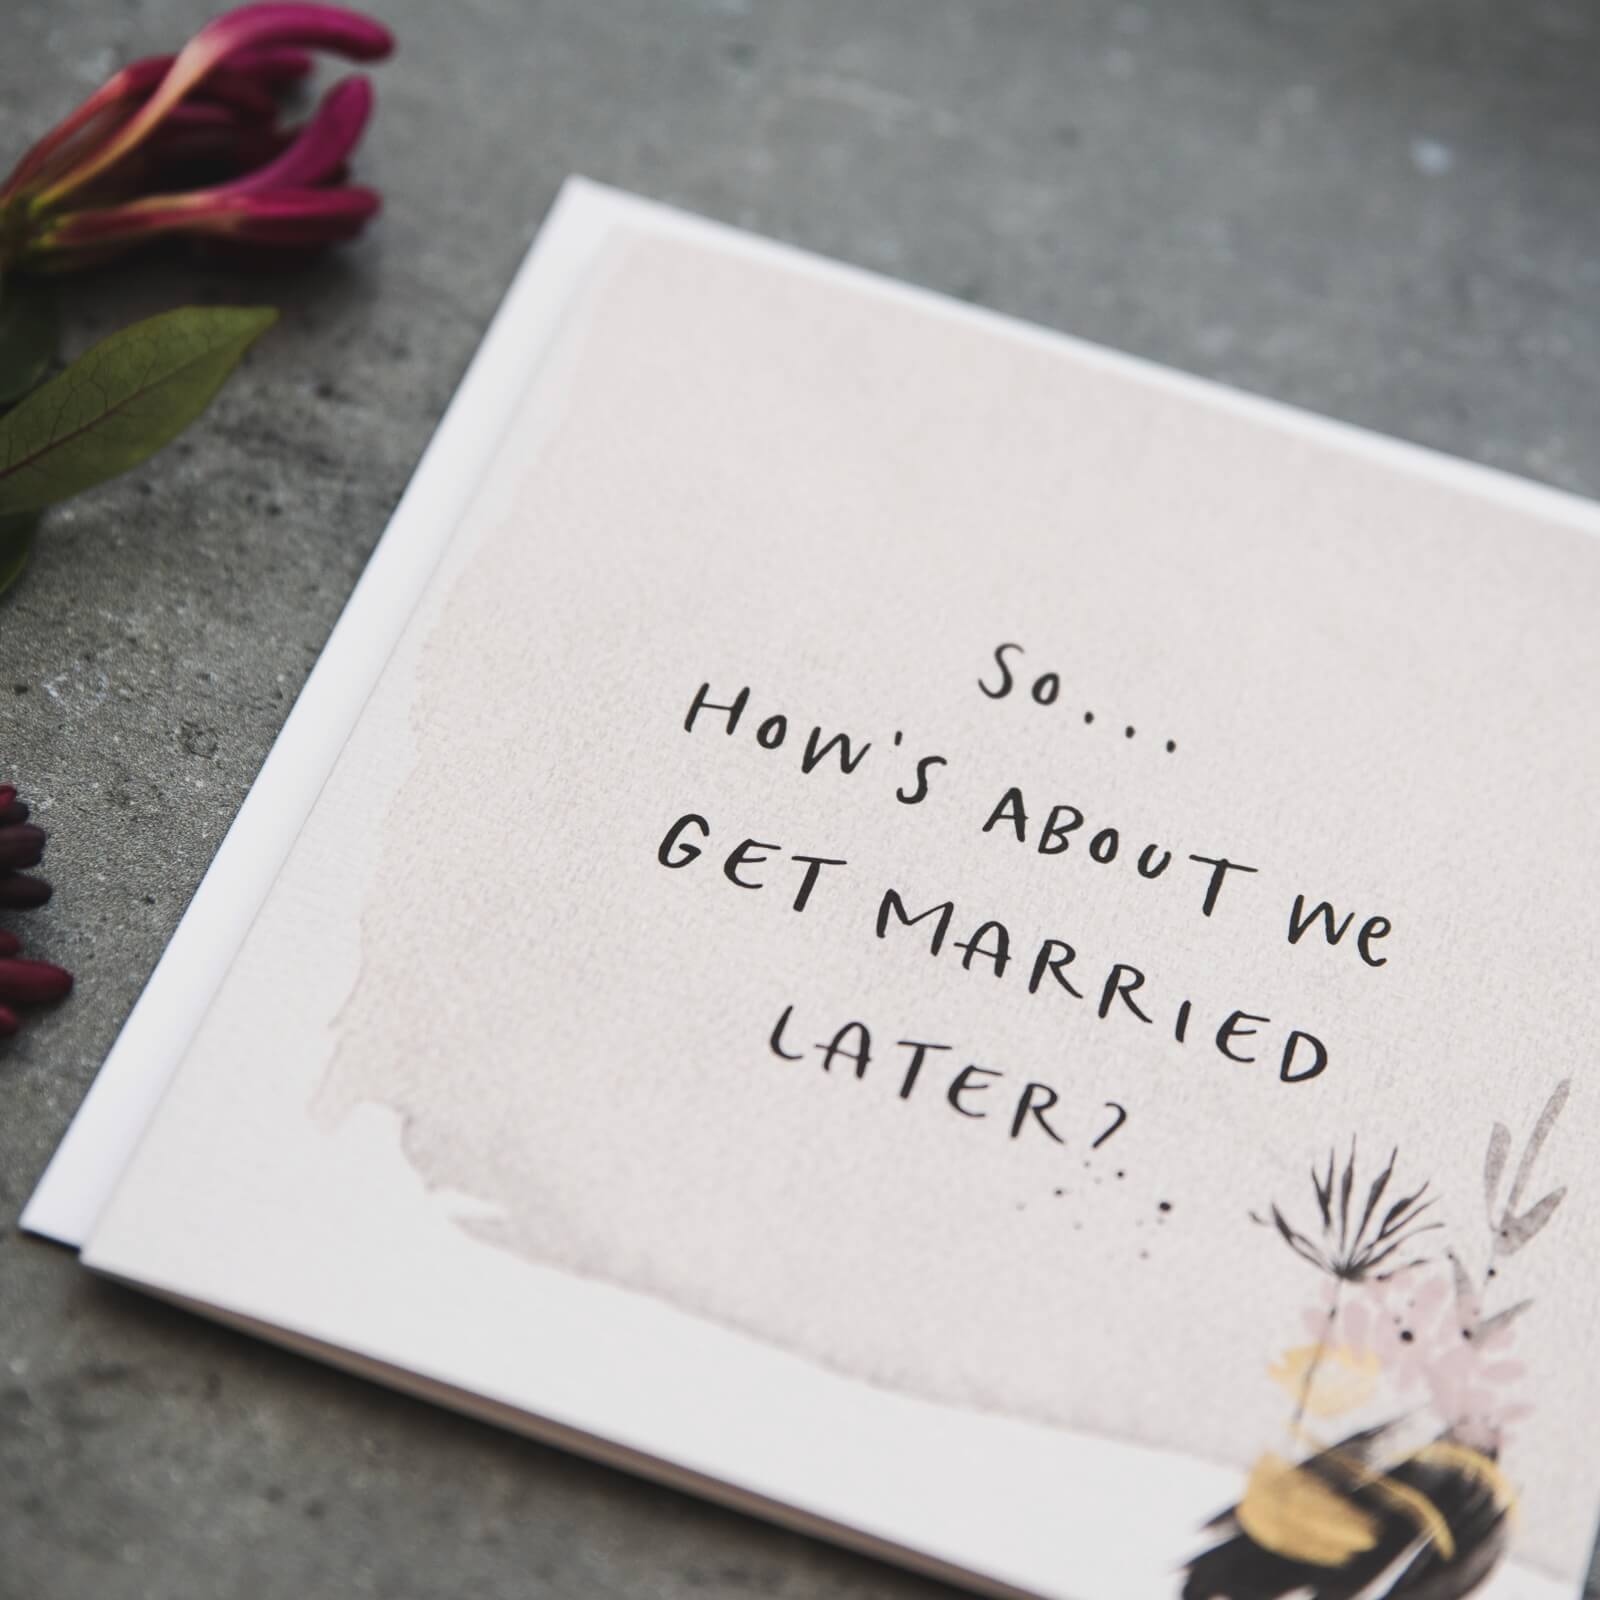 'Get Married Later?' Funny Wedding Day Card - I am Nat Ltd - Greeting Card